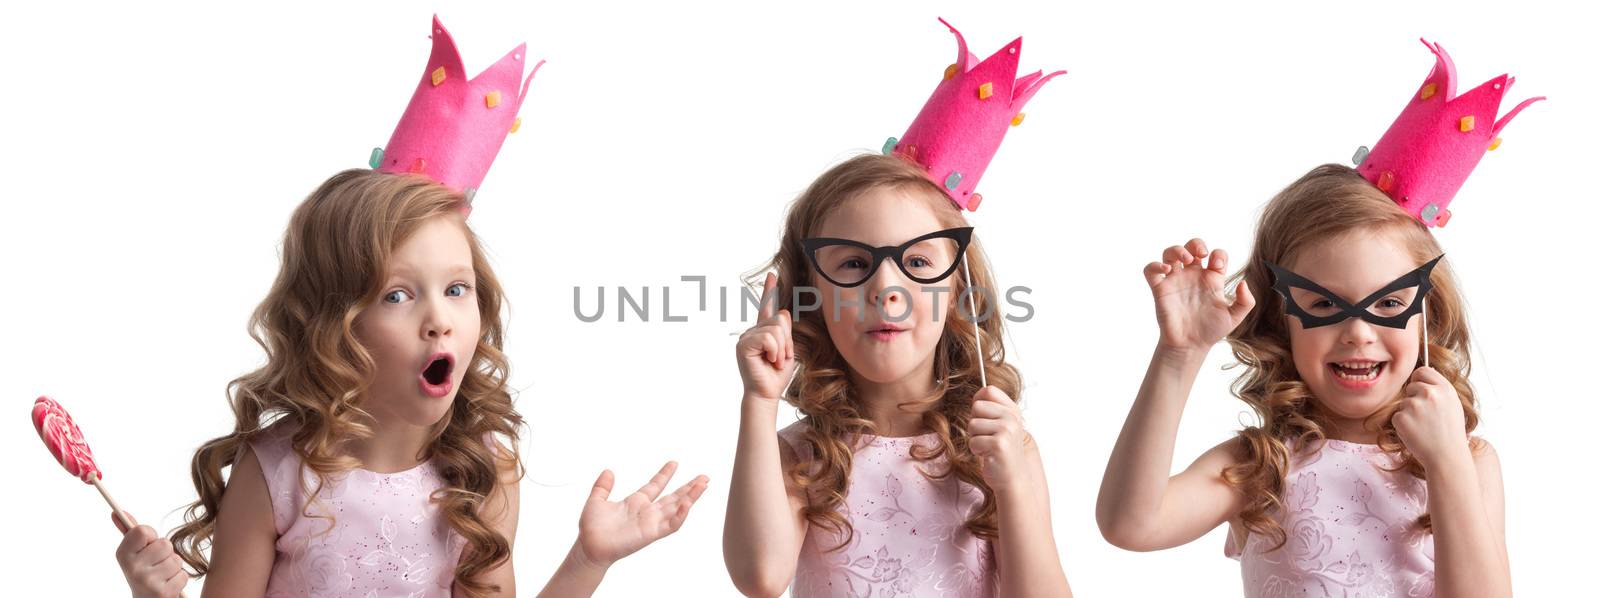 Beautiful little candy princess girl in crown bat mask, on fake glasses, with lollipop, halloween costume concept